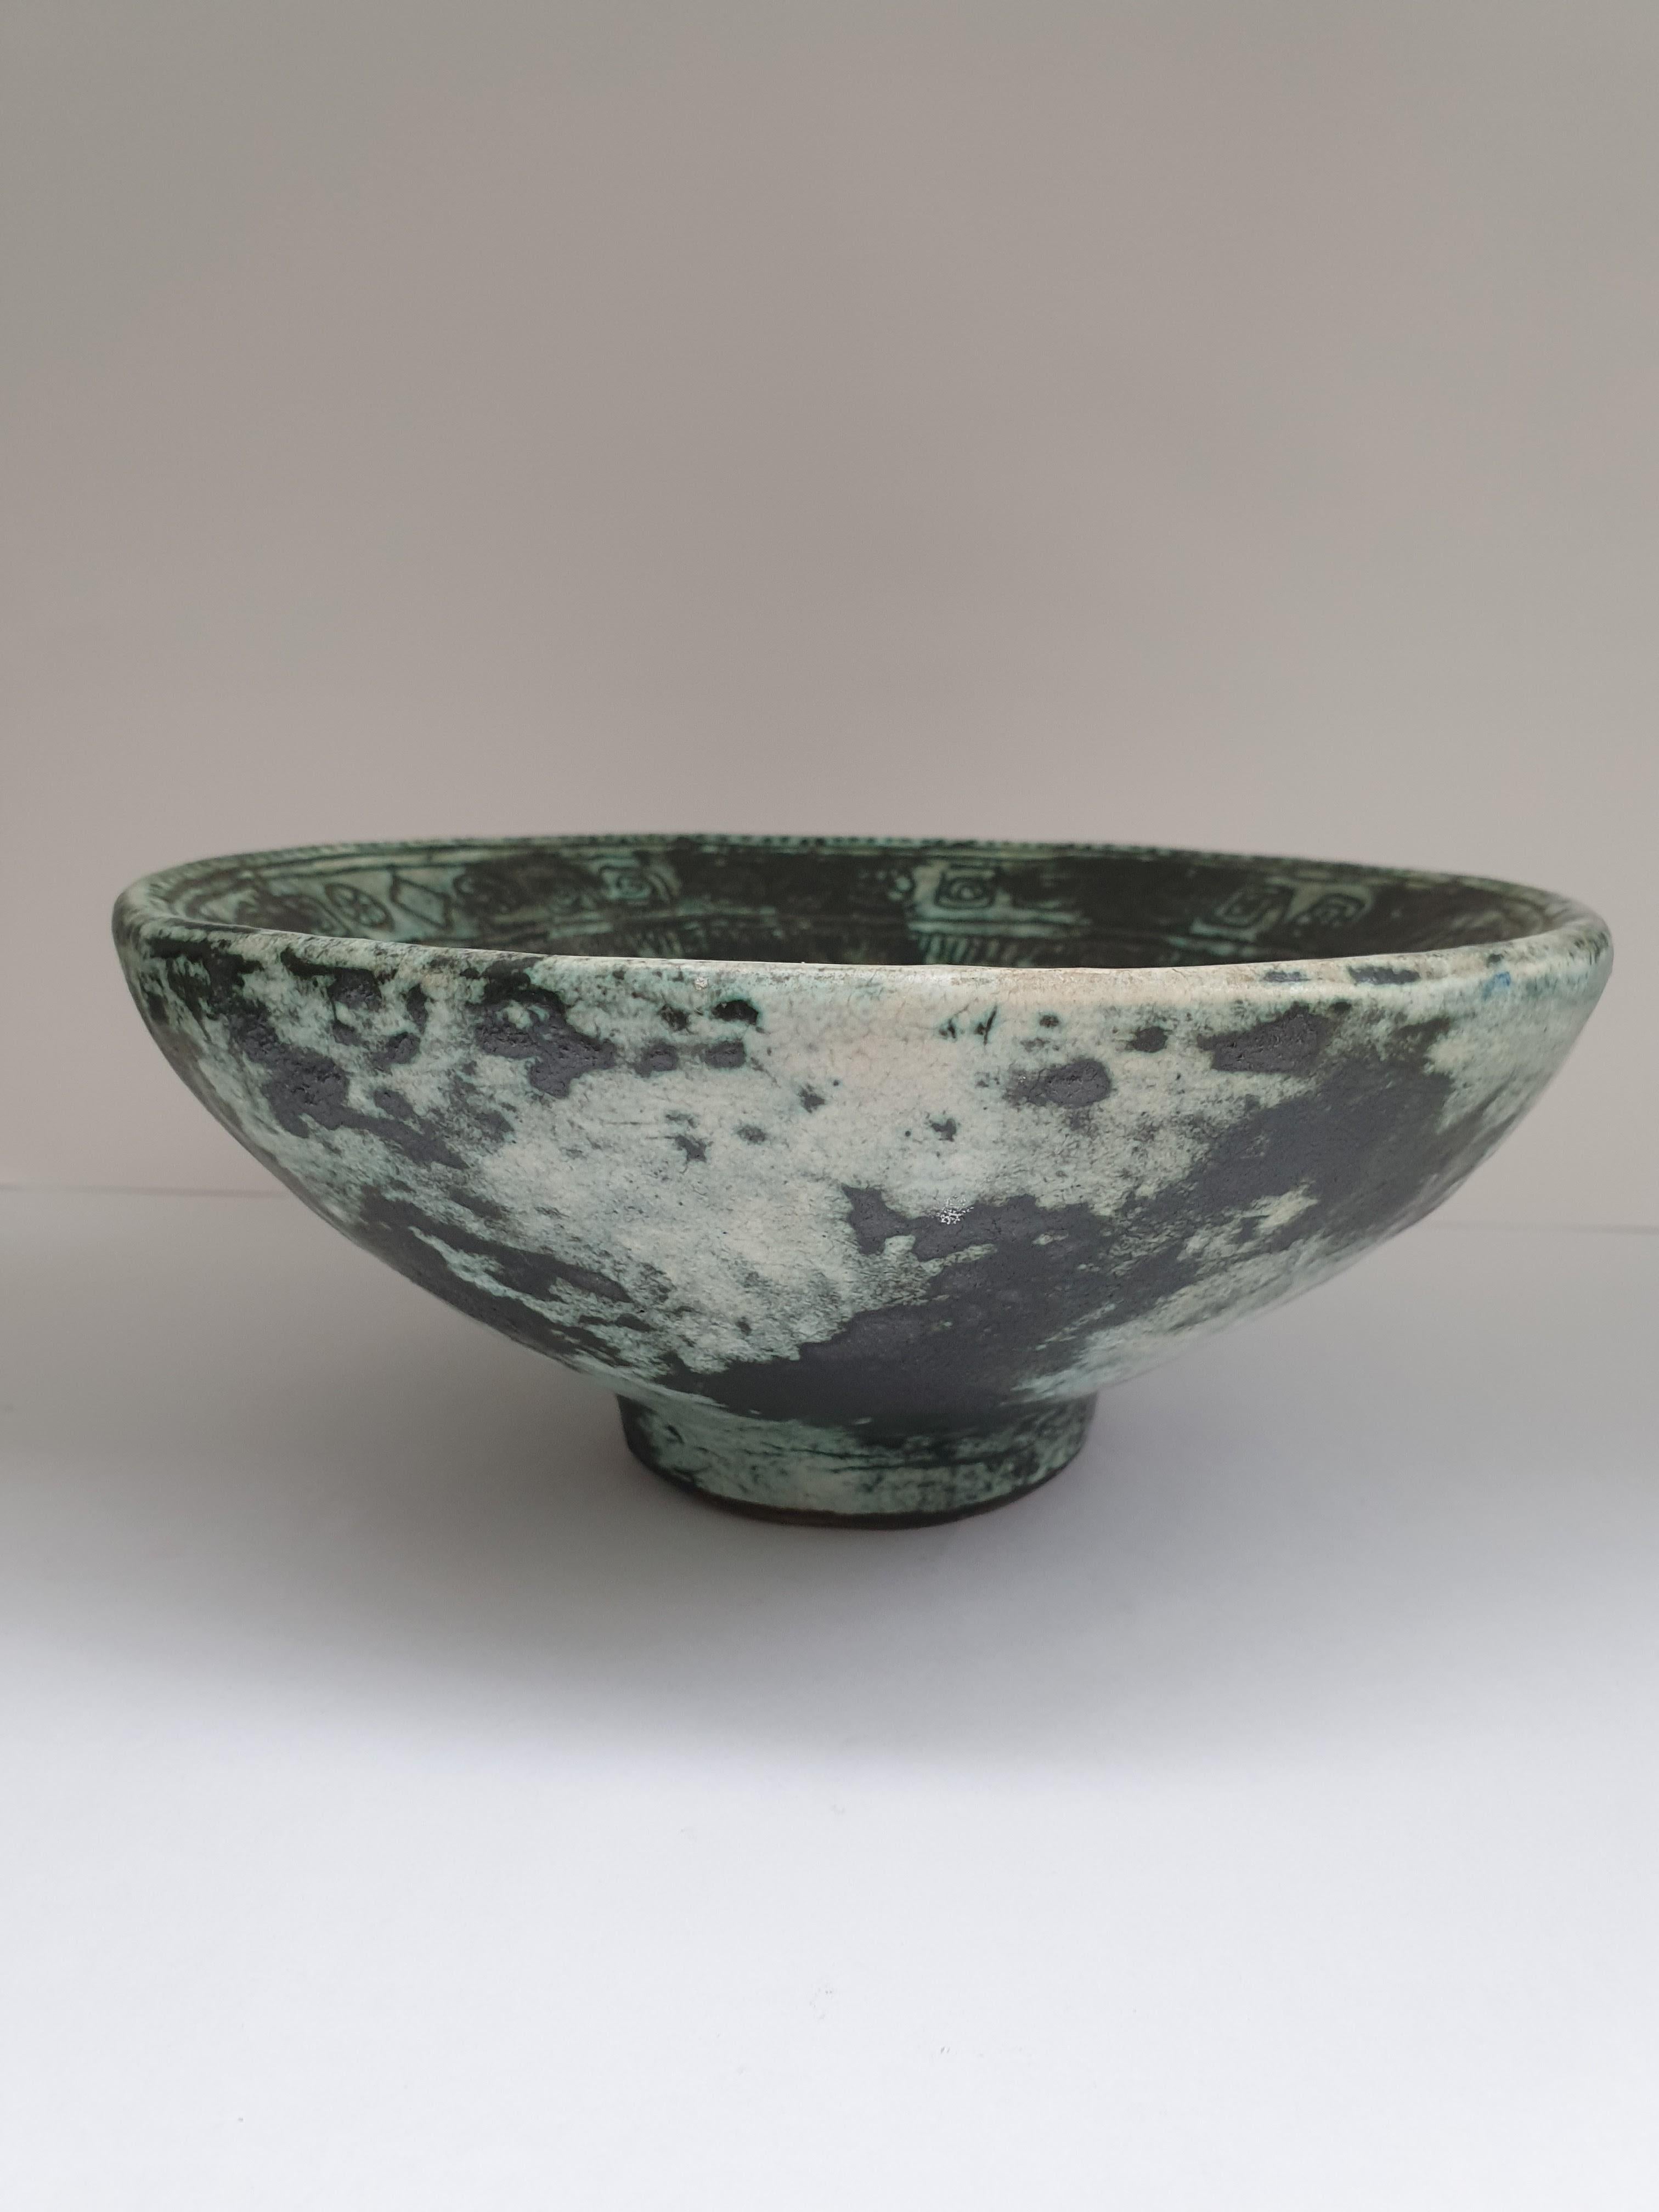 Simple matt glazed ceramic bowl by Jacques Blin depicting stylized birds.

Jacques Blin began making pottery in the late 1940s and his early work made use of modeling techniques, as well as slip casting and stamping, before moving on to wheel